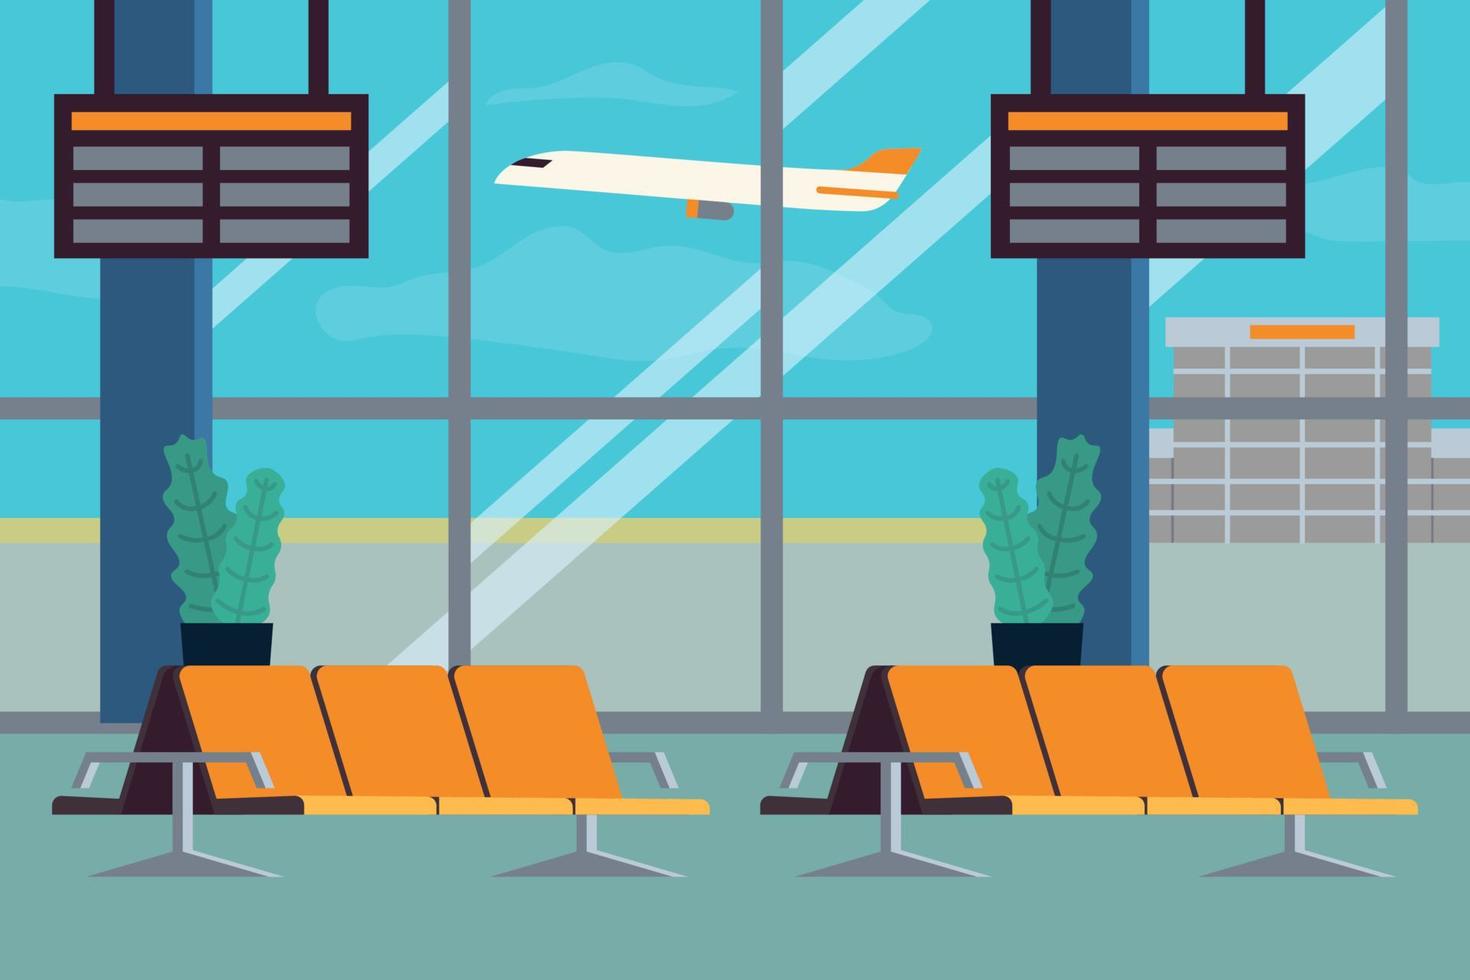 Airport Hall Interior. Waiting Room Or Departure Lounge Vector Illustration In Flat Style